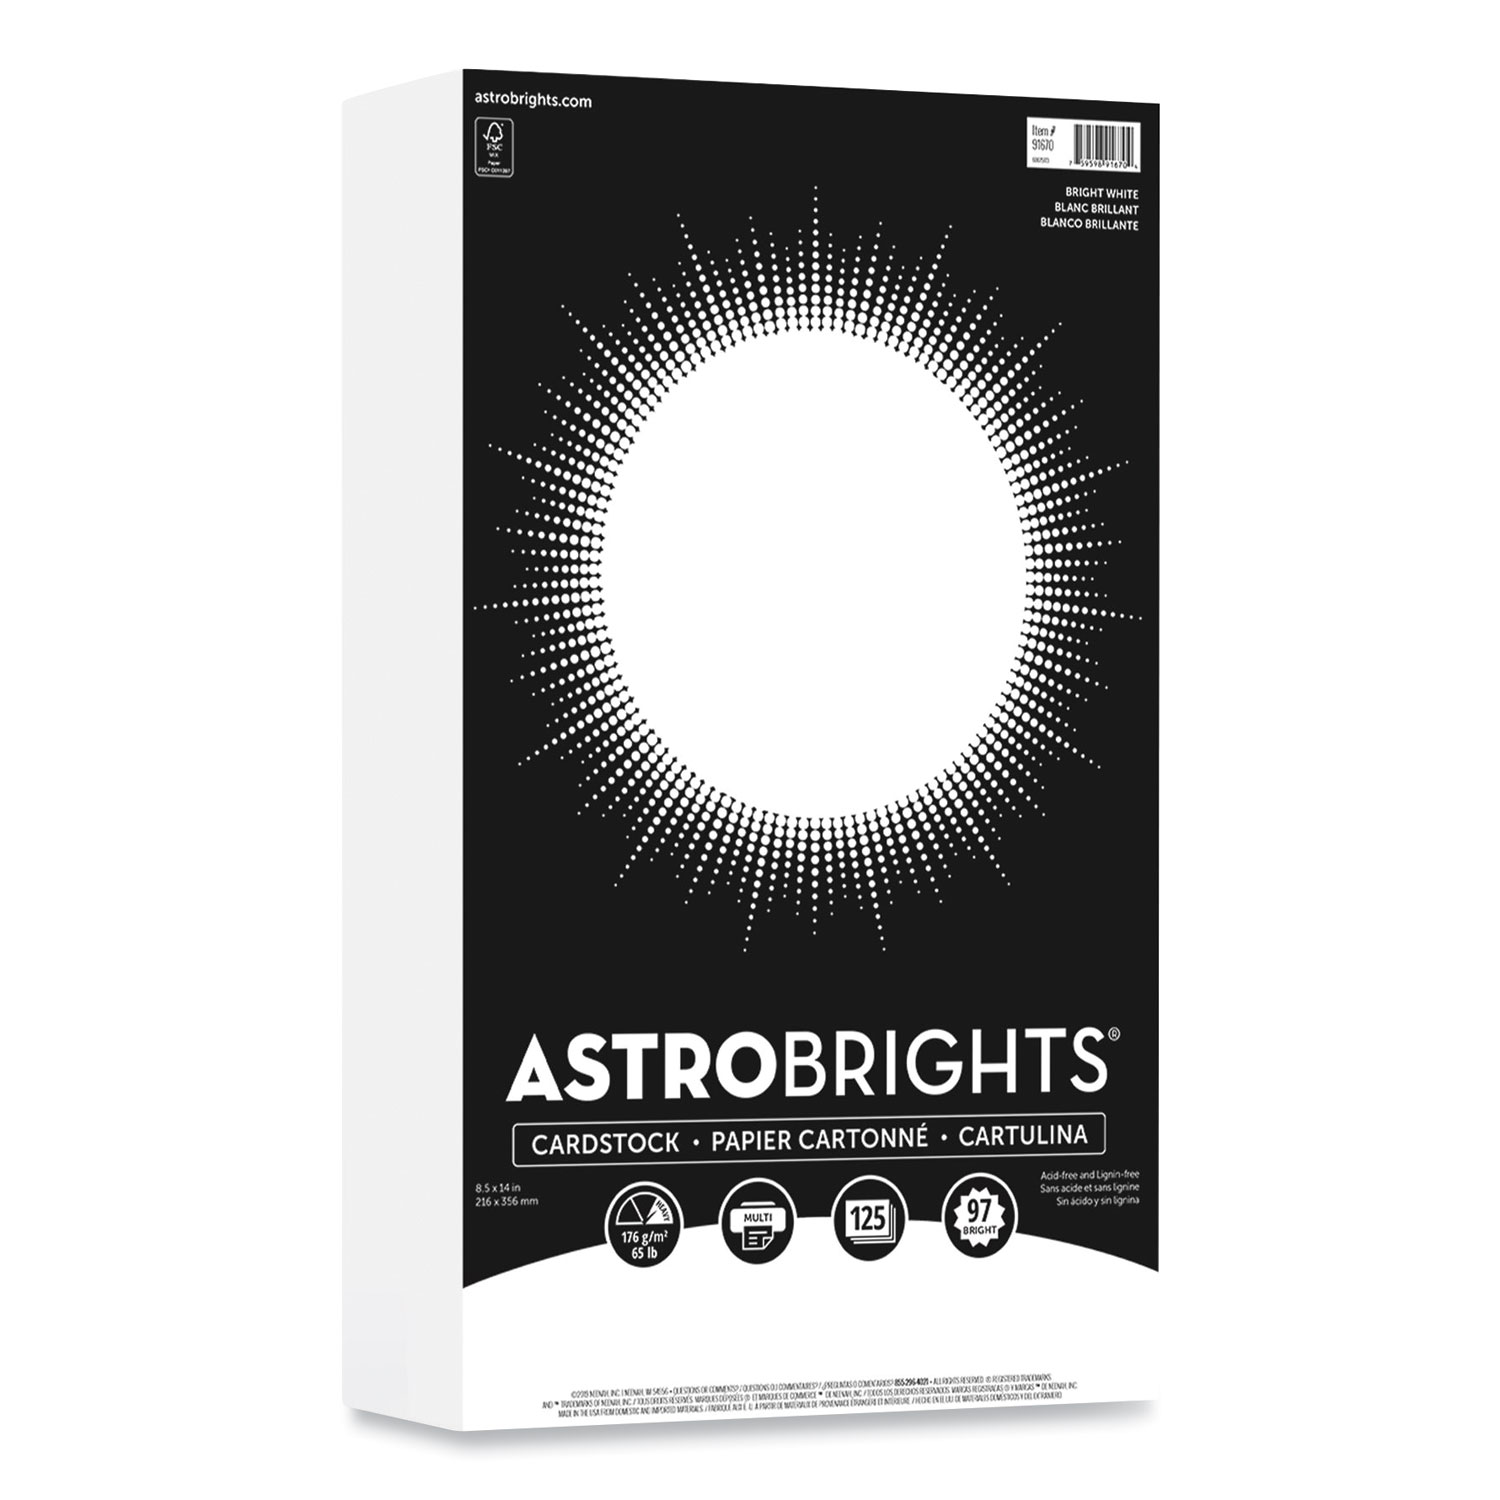  Astrobrights 91670 Color Cardstock, 65 lb, 8.5 x 14, Bright White, 125/Pack (WAU24399671) 